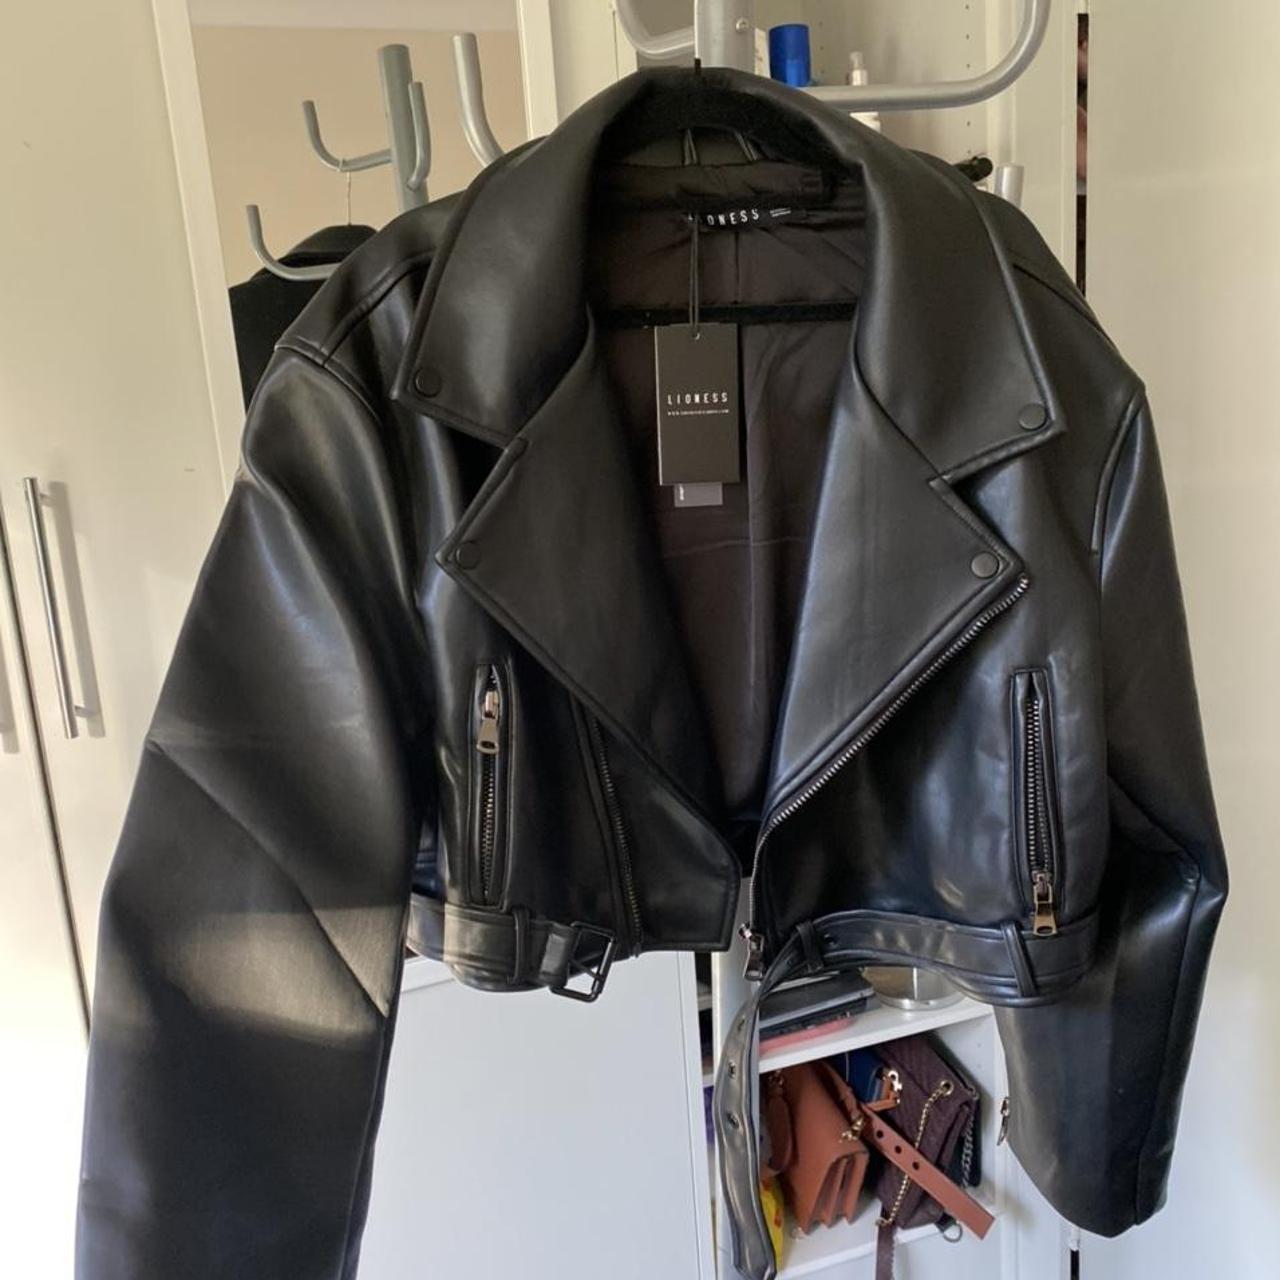 THE STATEN ISLAND JACKET IS THE PERFECT LEATHER... - Depop